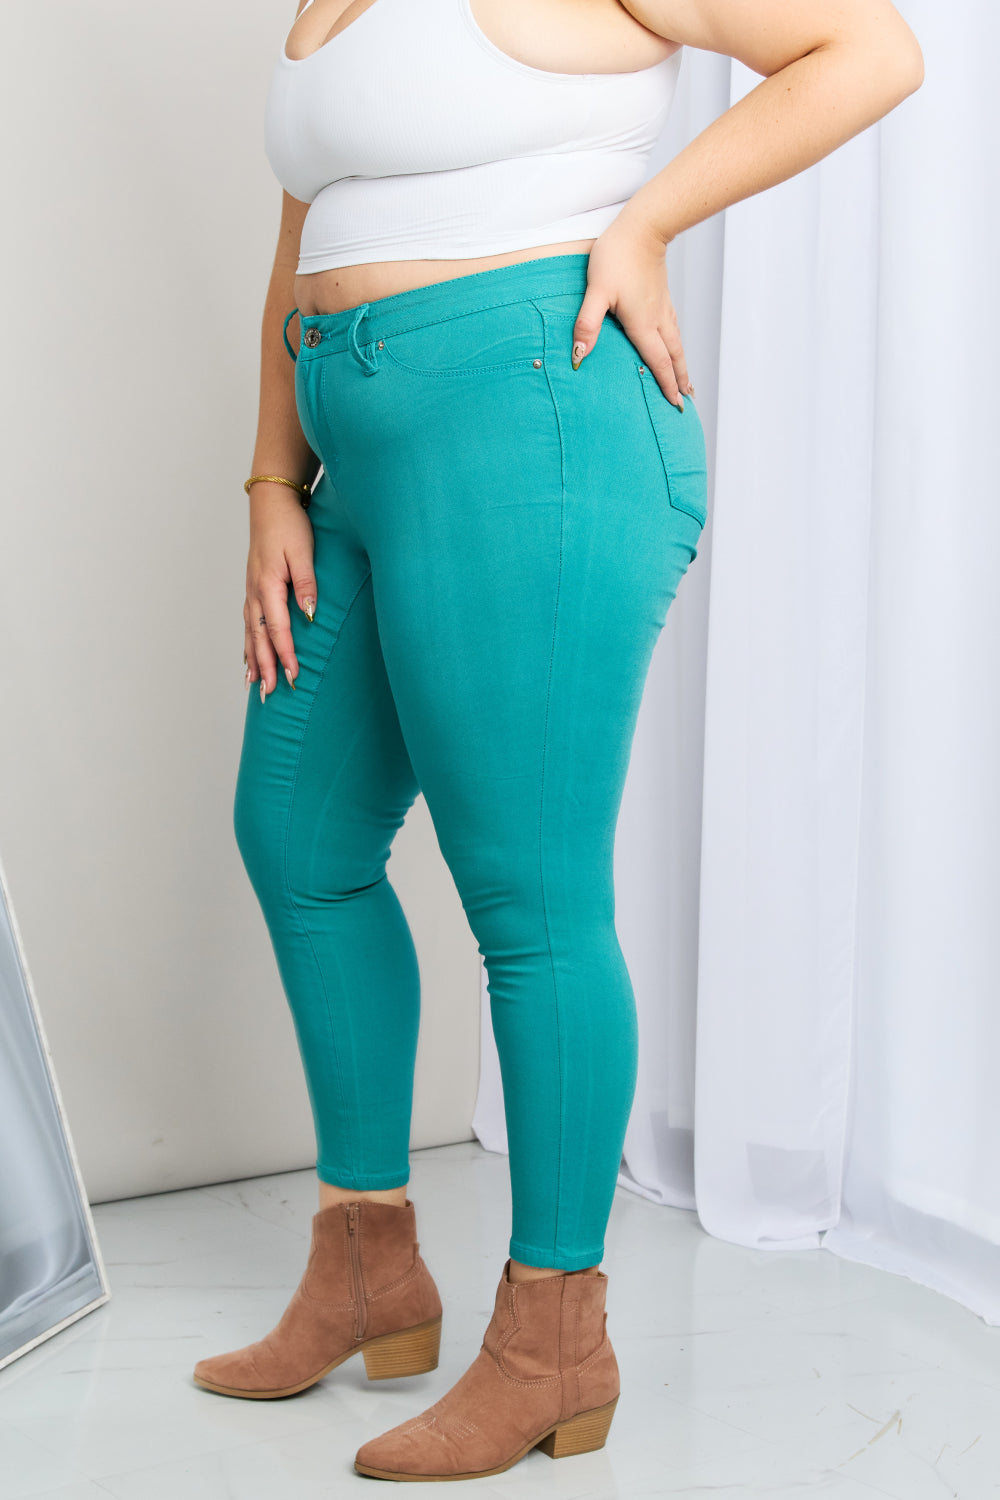 Kate Hyper-Stretch Full Size Mid-Rise Skinny Jeans in Sea Green | Jeans - CHANELIA